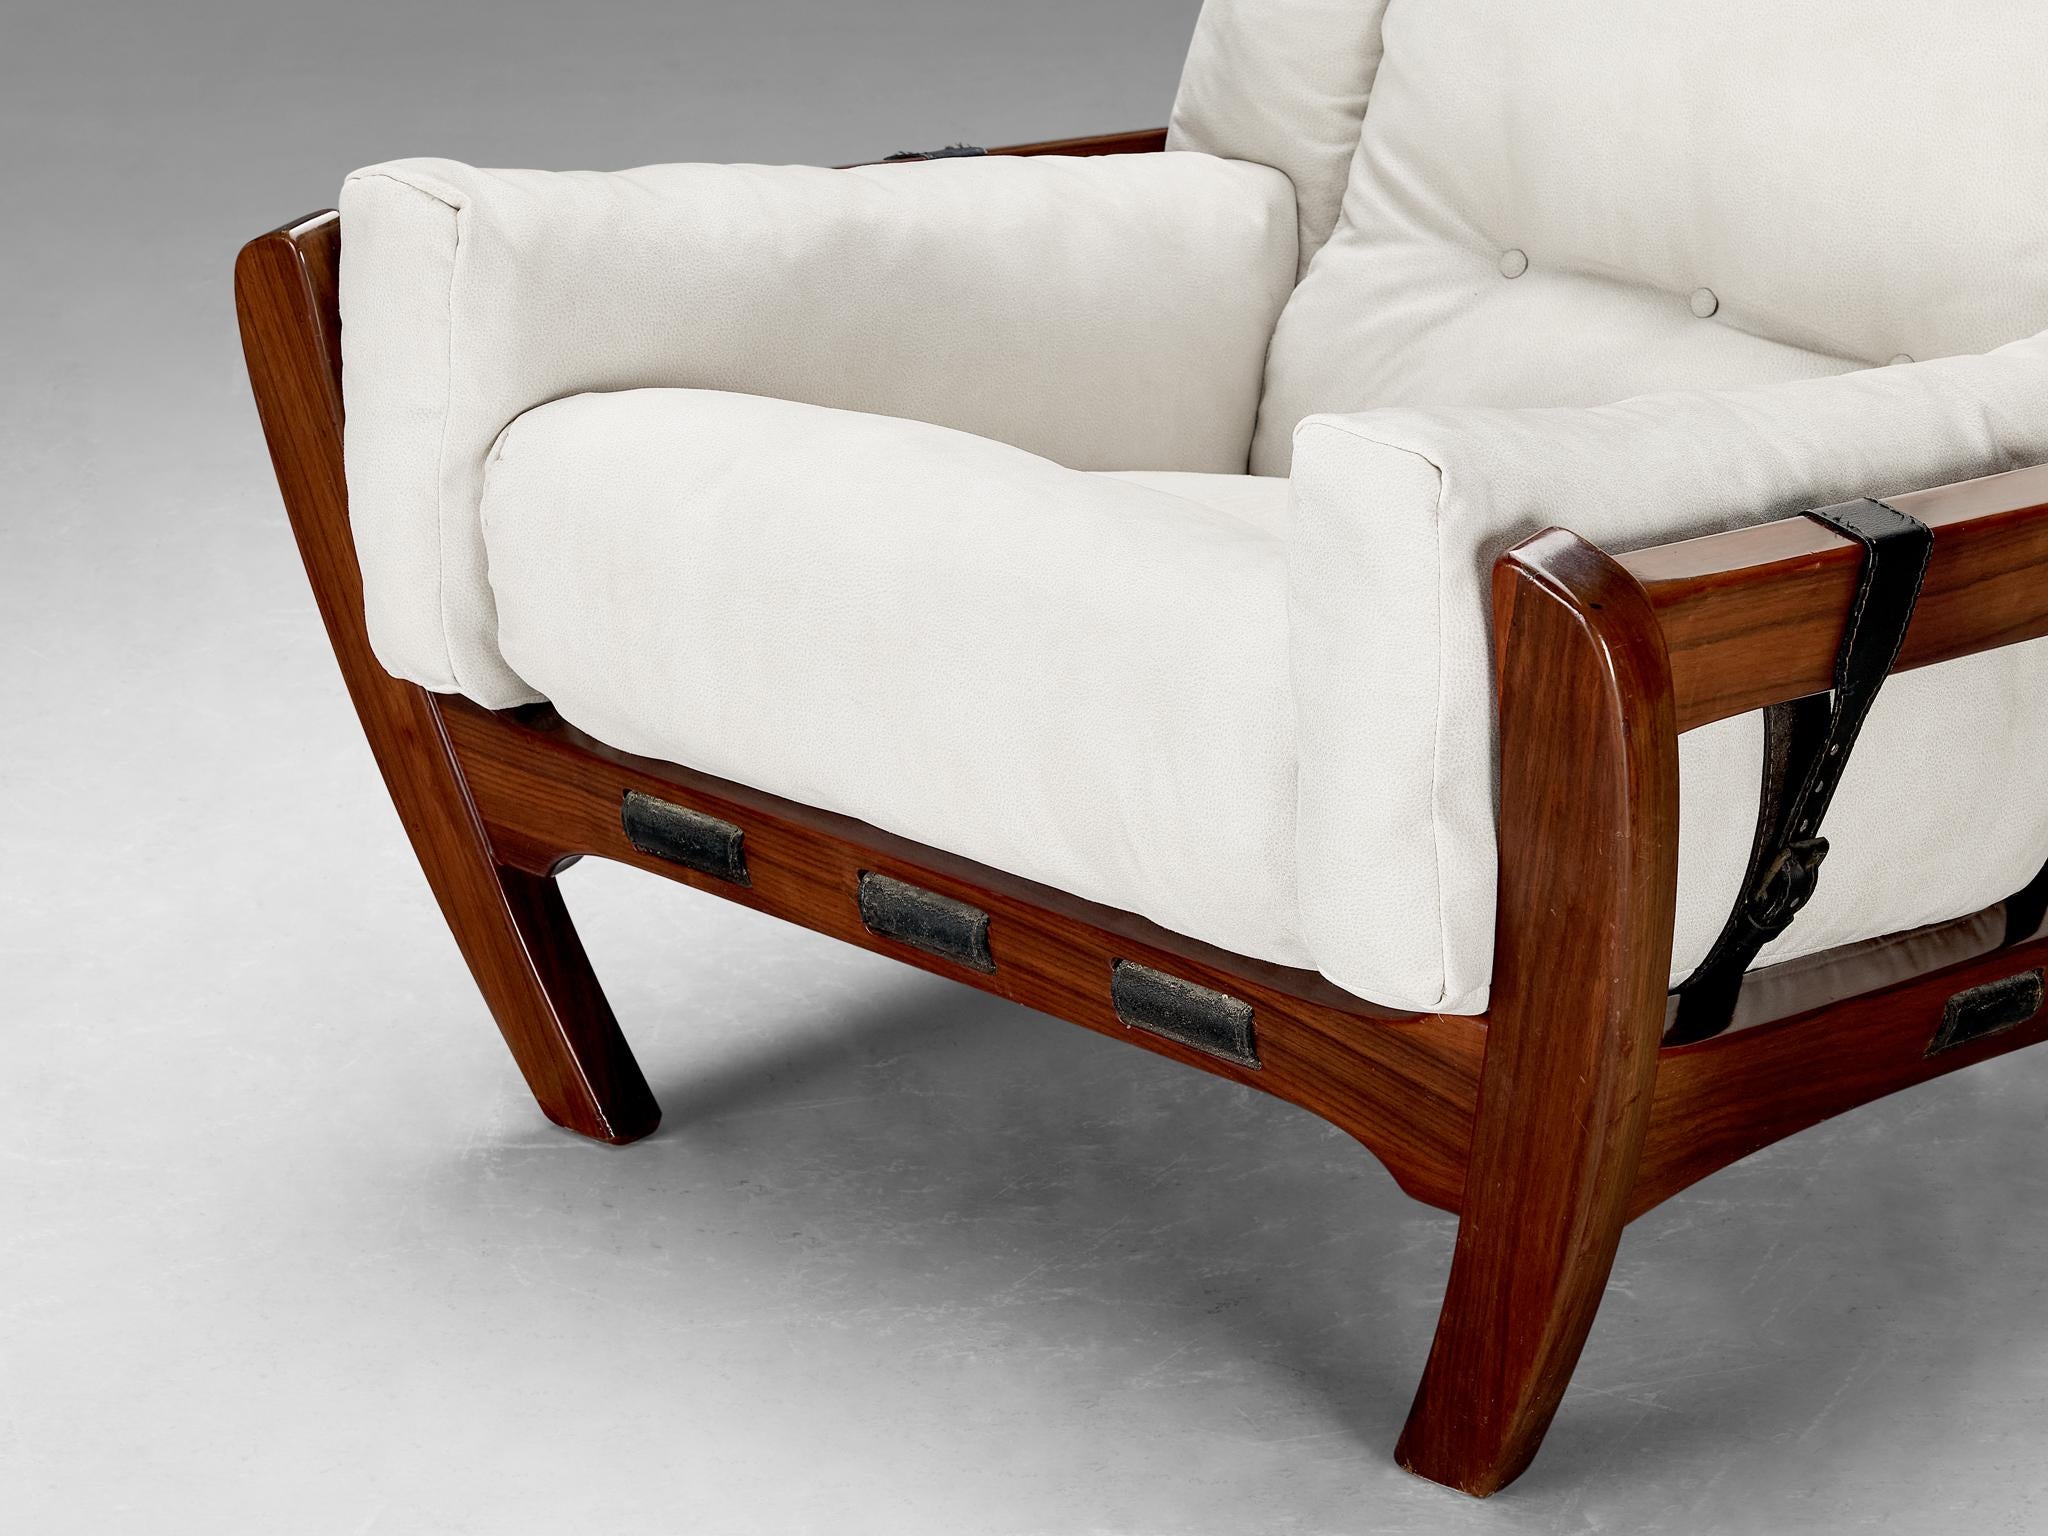 Luciano Frigerio 'Rancero' Lounge Chair with Ottoman in White Upholstery